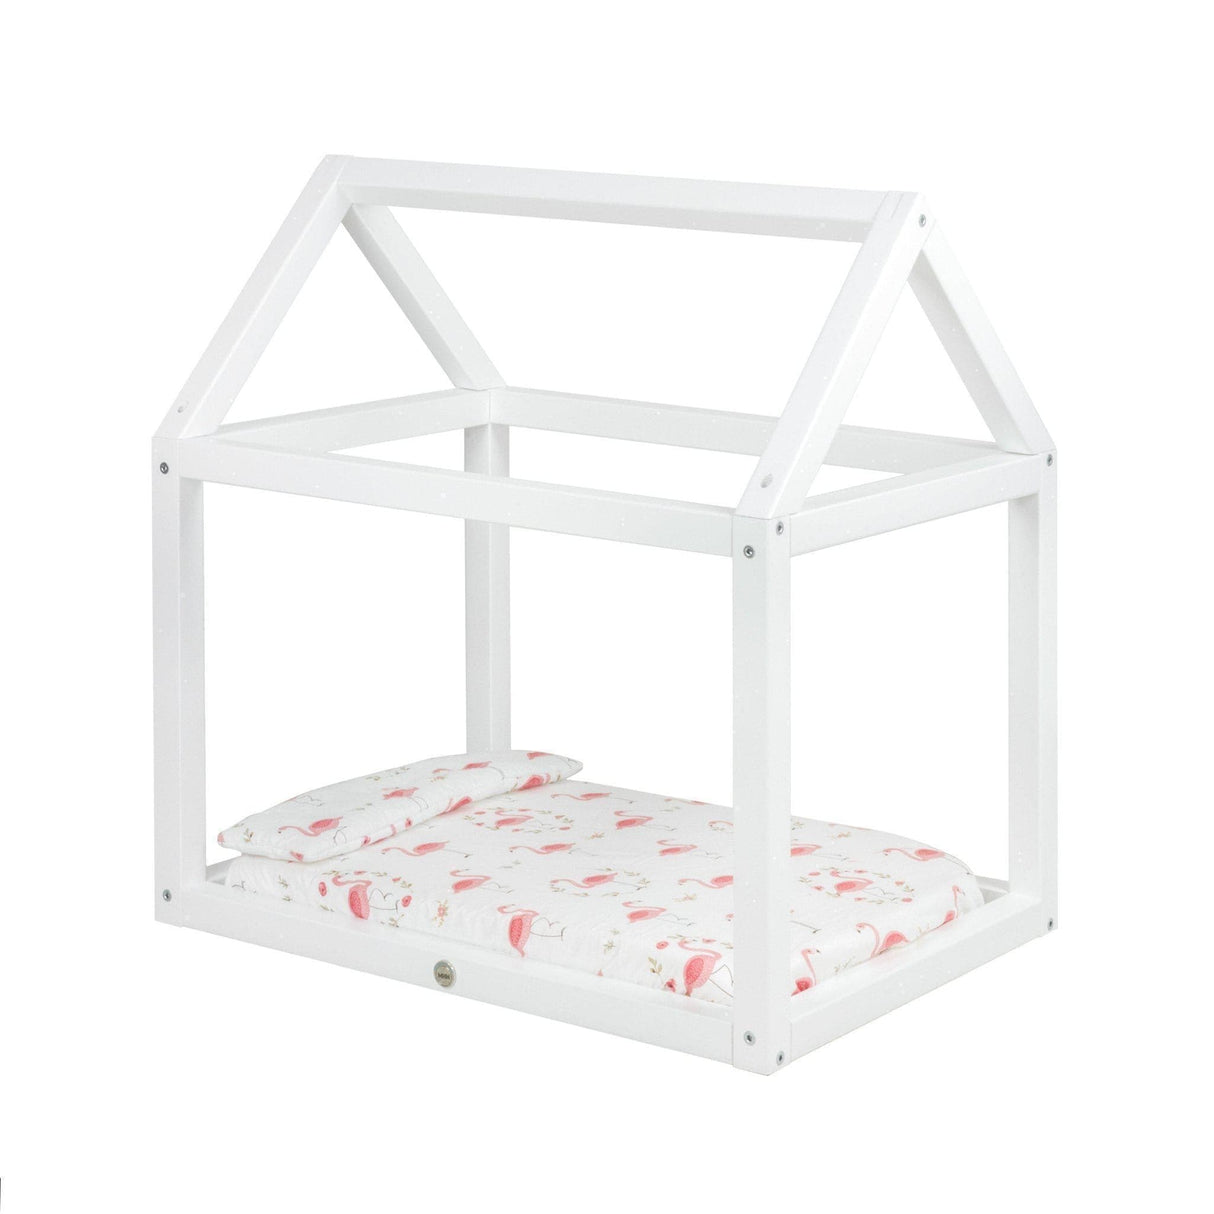 Casa Wooden Doll House Bed - PINE-Imaginative Play-My Happy Helpers